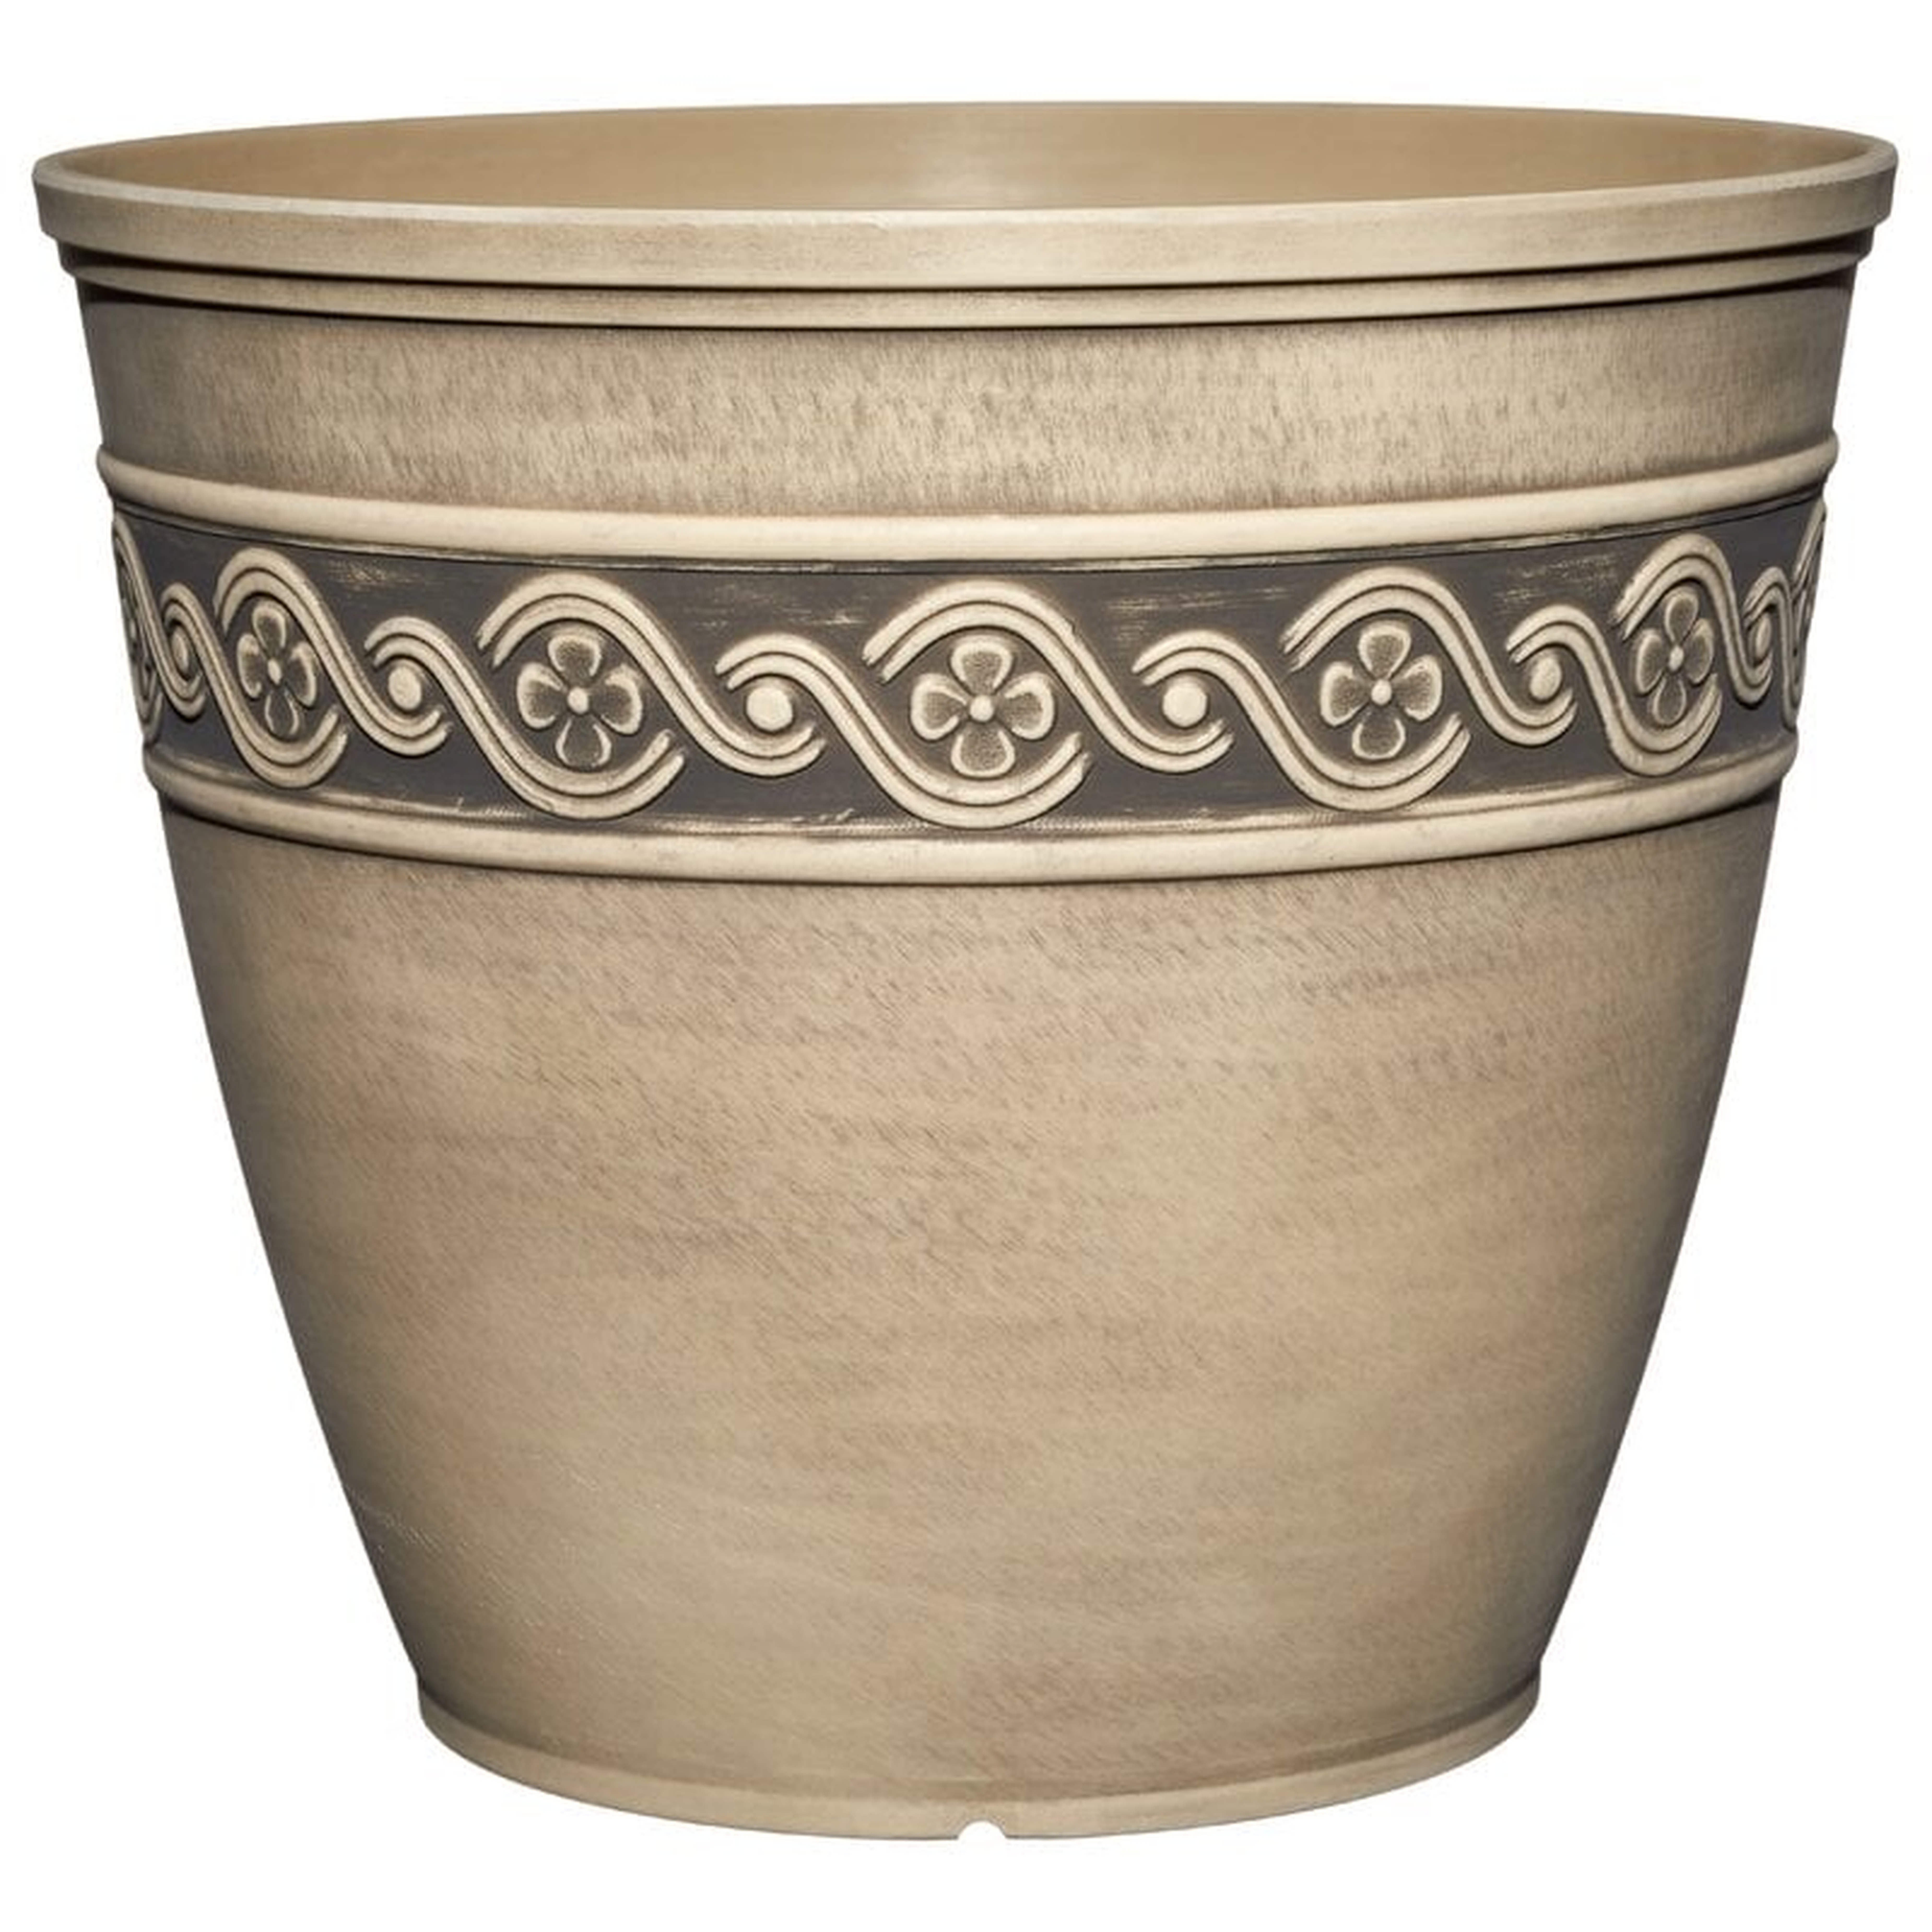 Theroux Stone Dust, Resin and Silicon Pot Planter - Wayfair